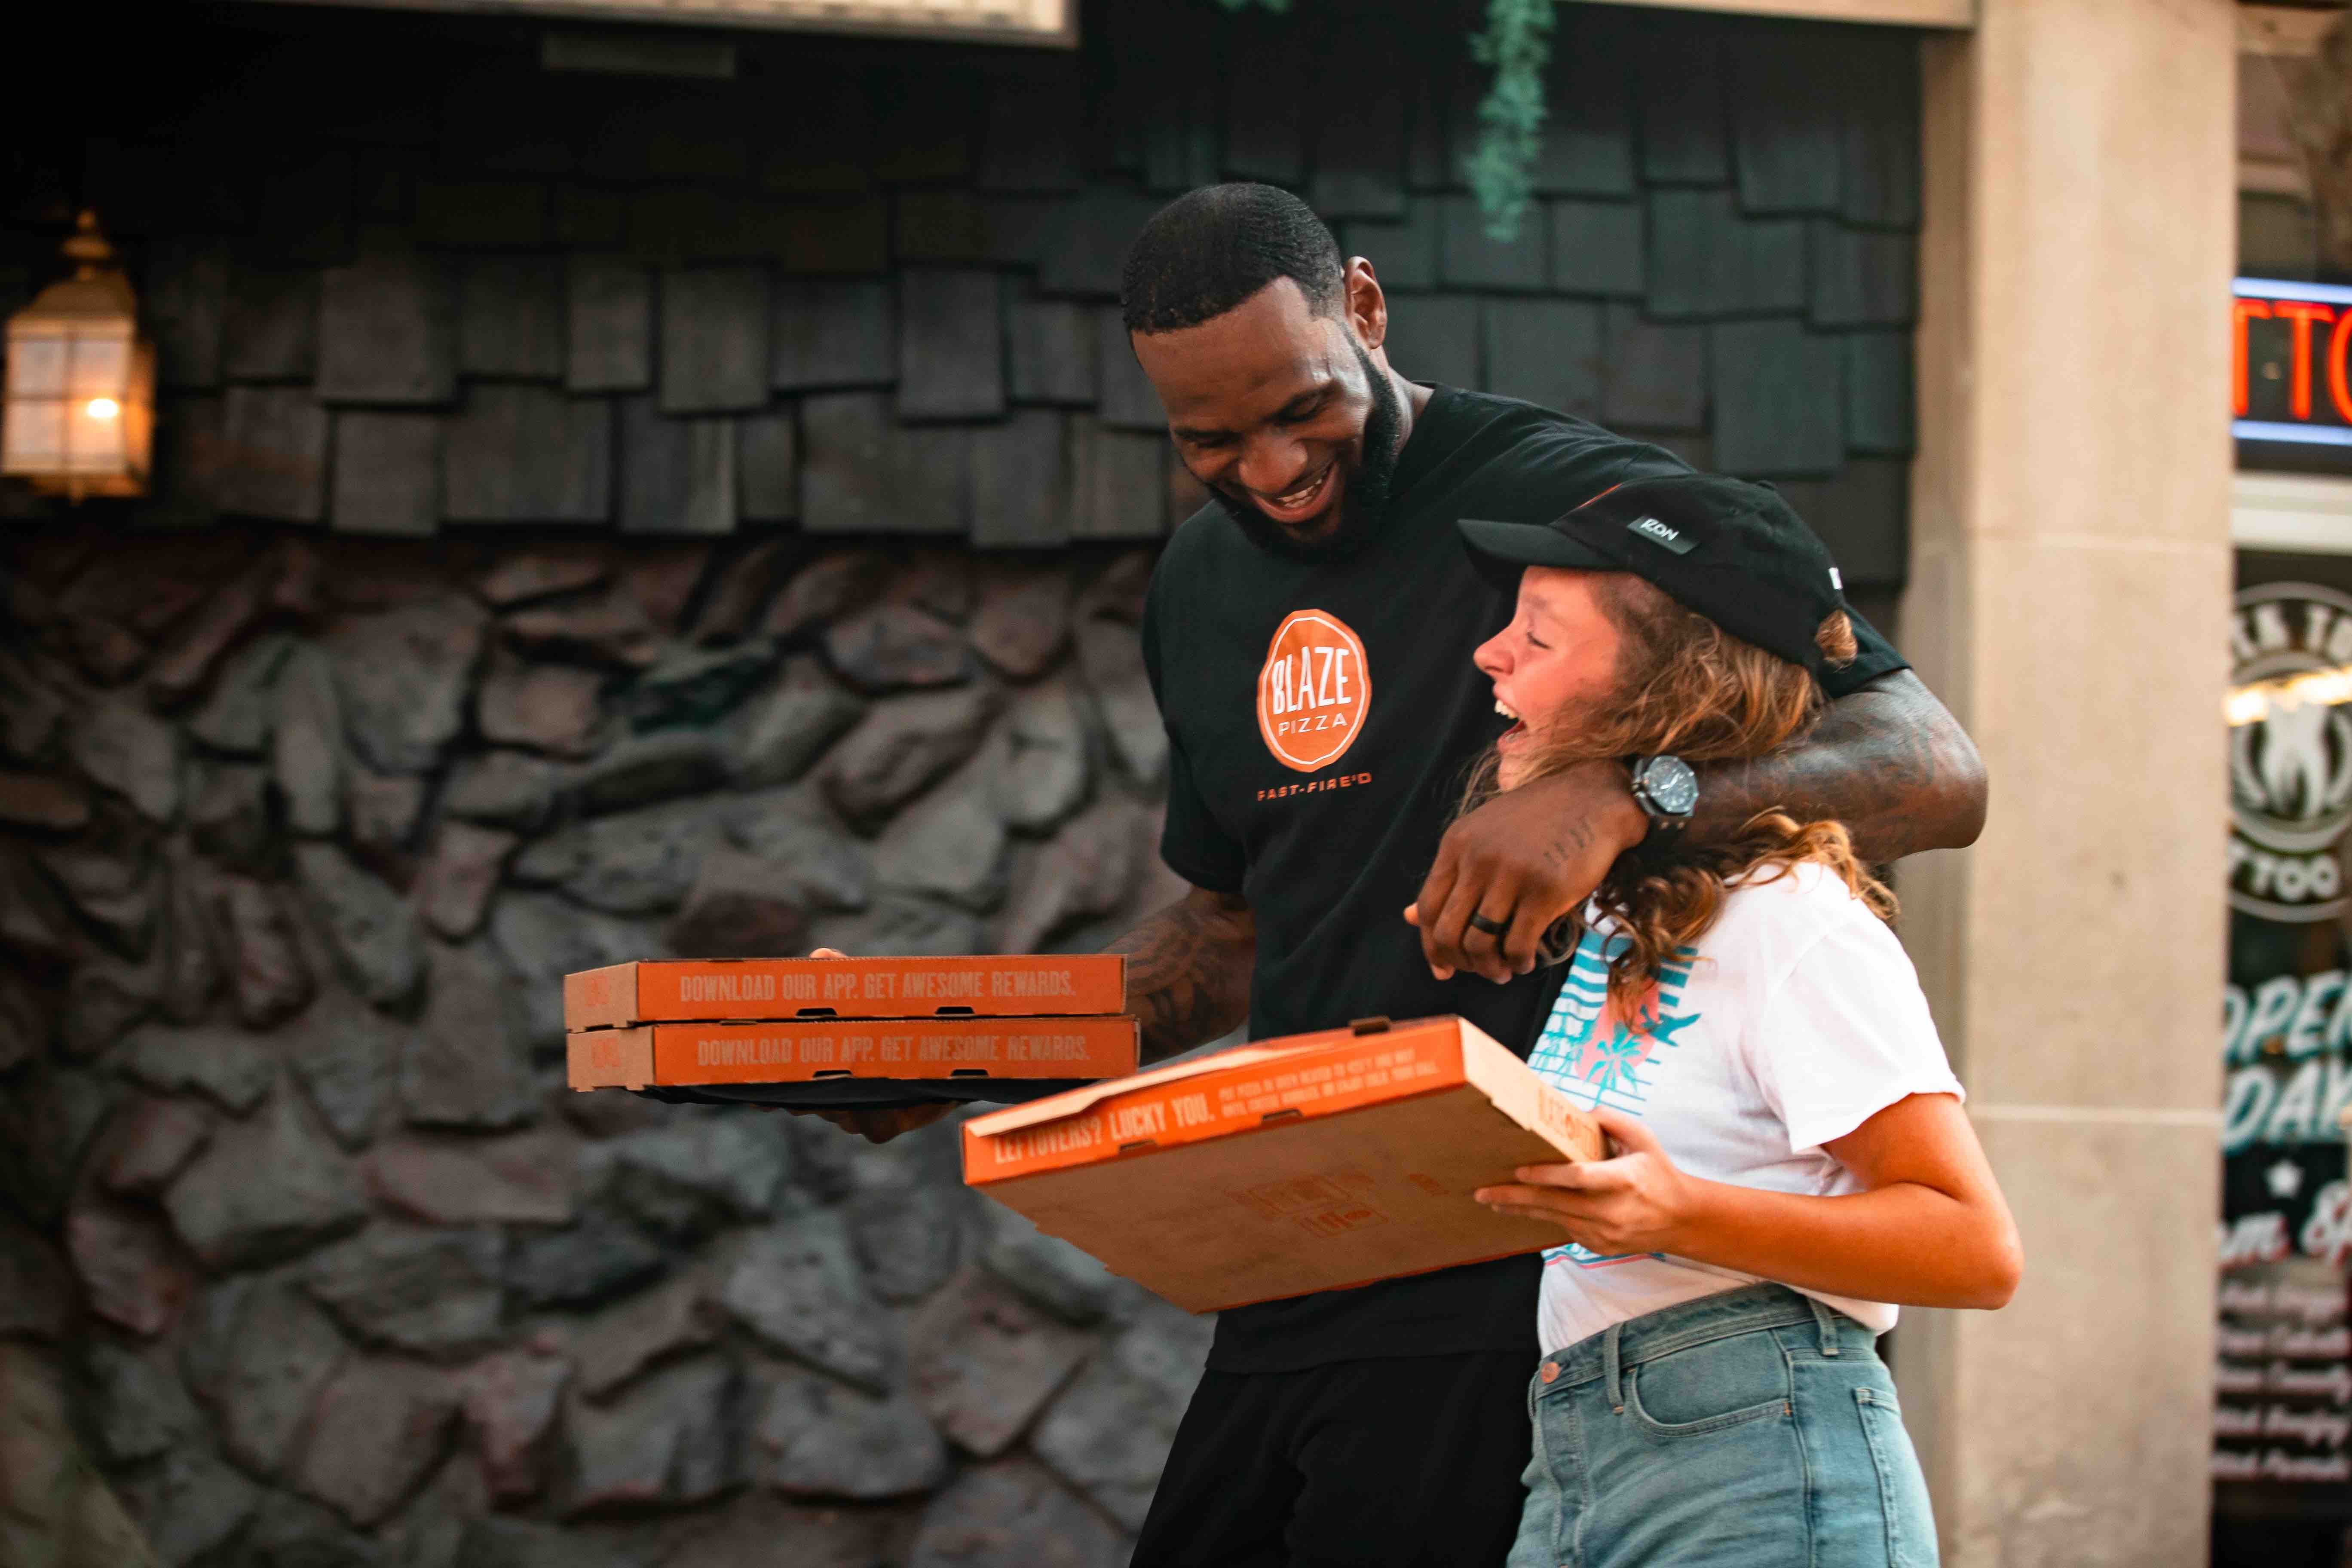 LeShip! Lakers’ LeBron James holds Pizza on the street while ‘GOAT’ pretending to be a delivery guy